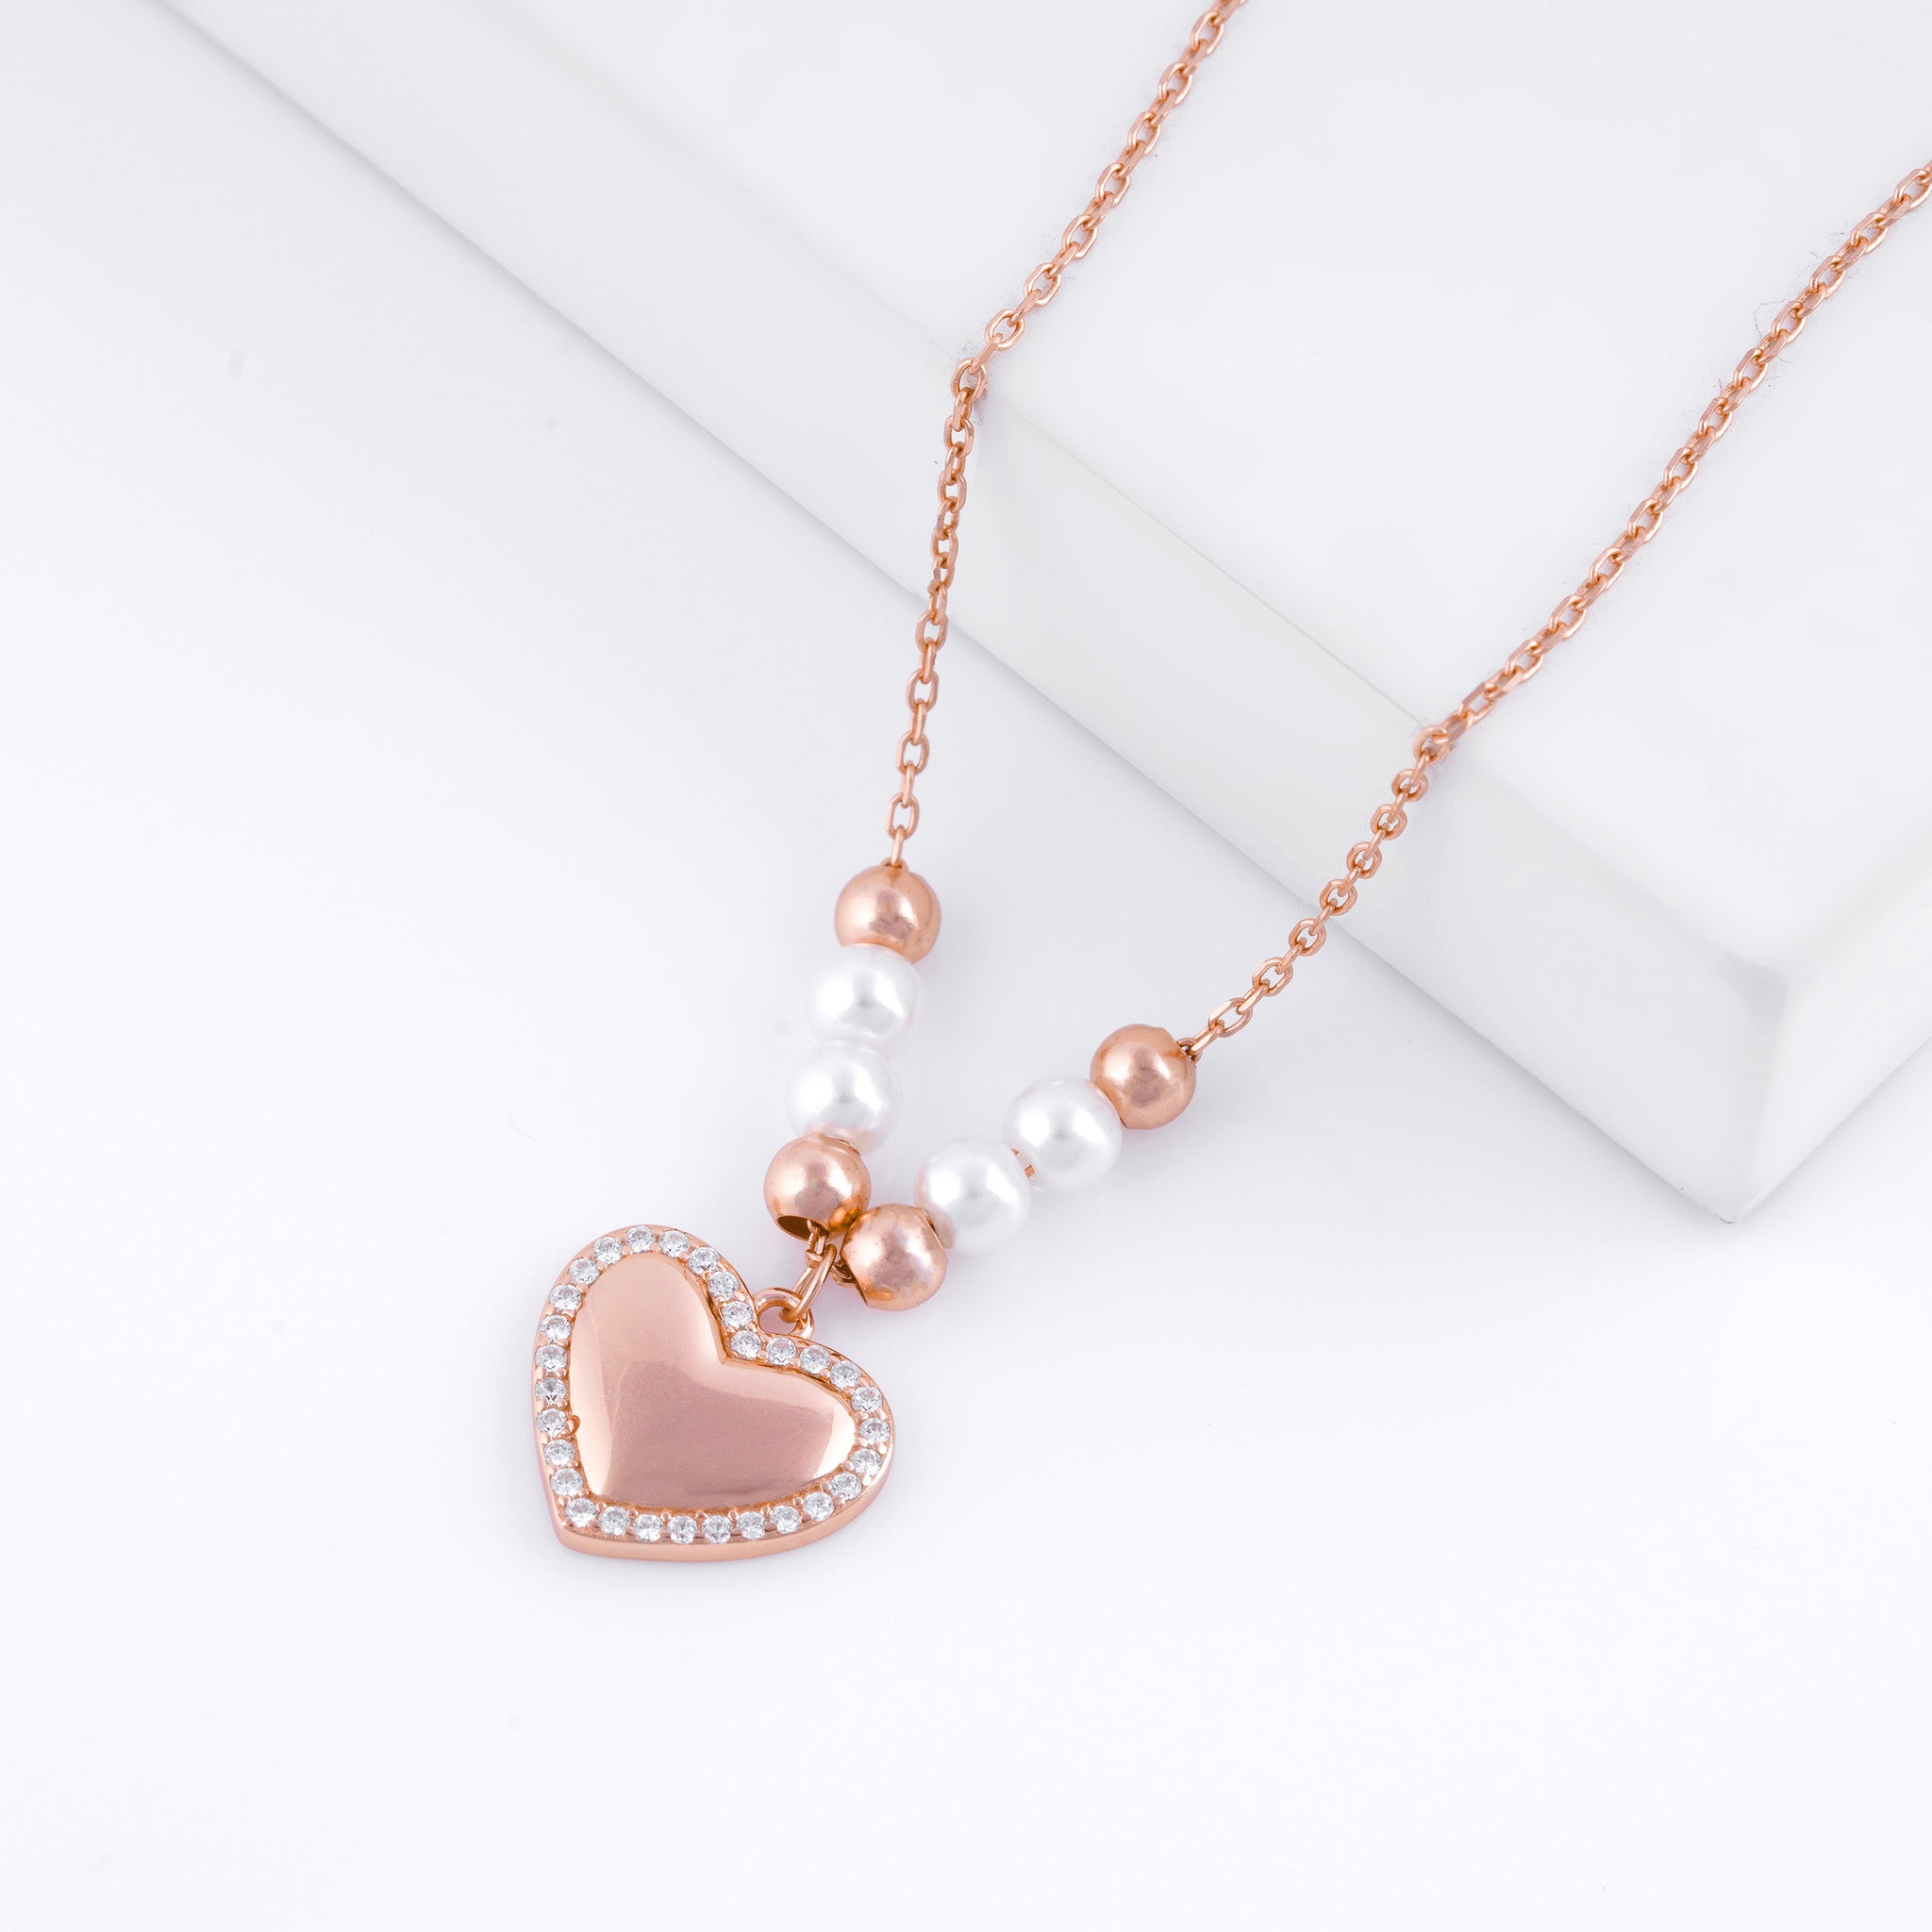 Fashionable Bead Decor Heart Silver Charm Necklace For Daily Wear